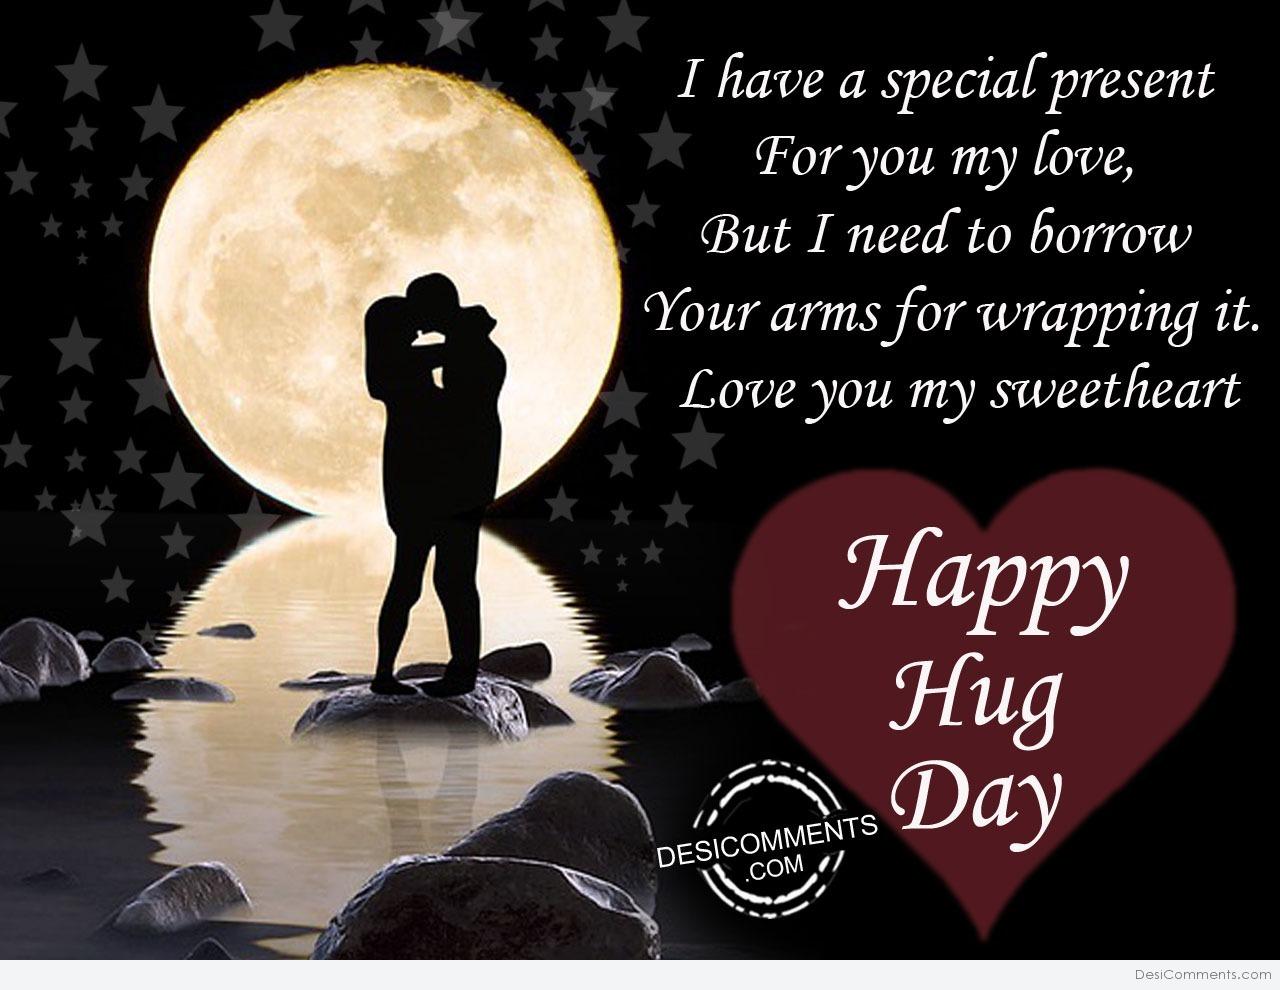 I have a special present, Happy hug day - DesiComments.com